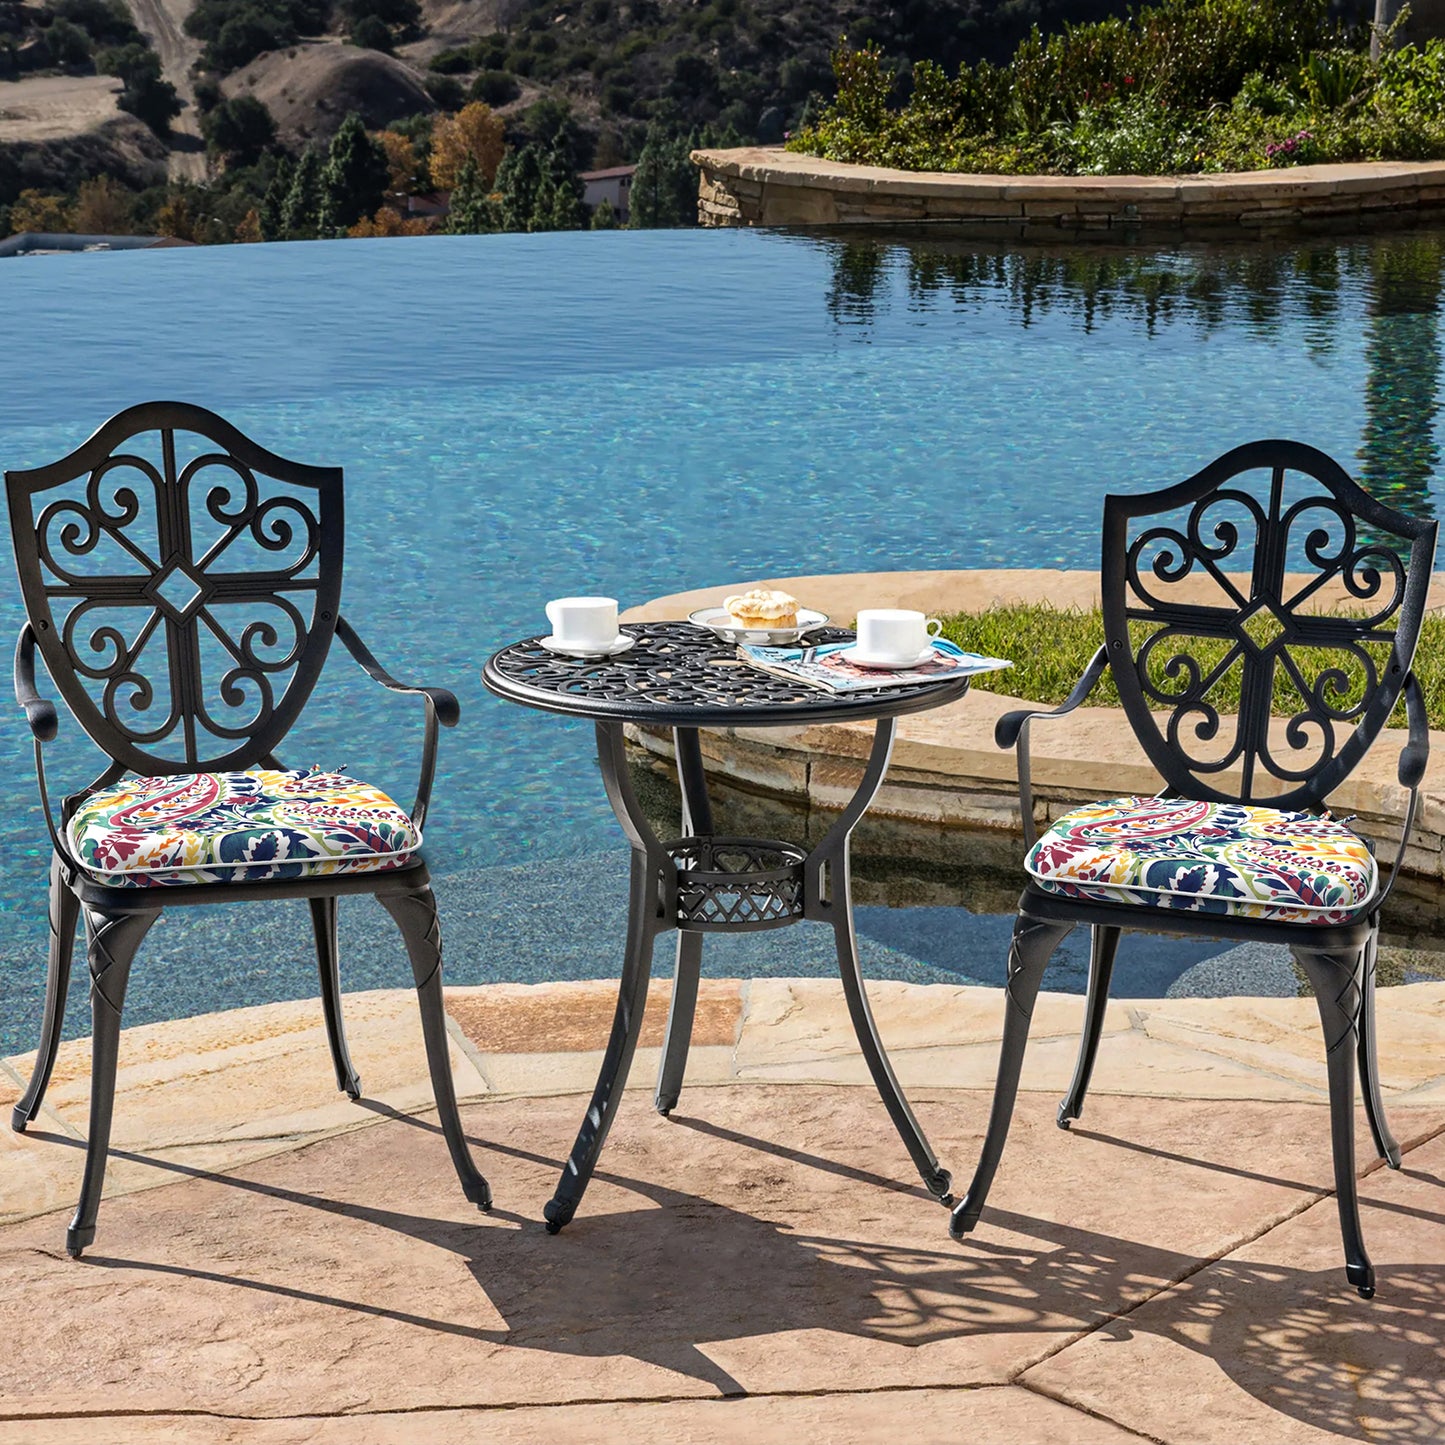 Melody Elephant Outdoor Chair Cushions Set of 4, Water Resistant Patio Chair Pads with Ties, Seat Cushions for Home Garden Furniture Decoration, 16”x17”,  Vigour Paisley